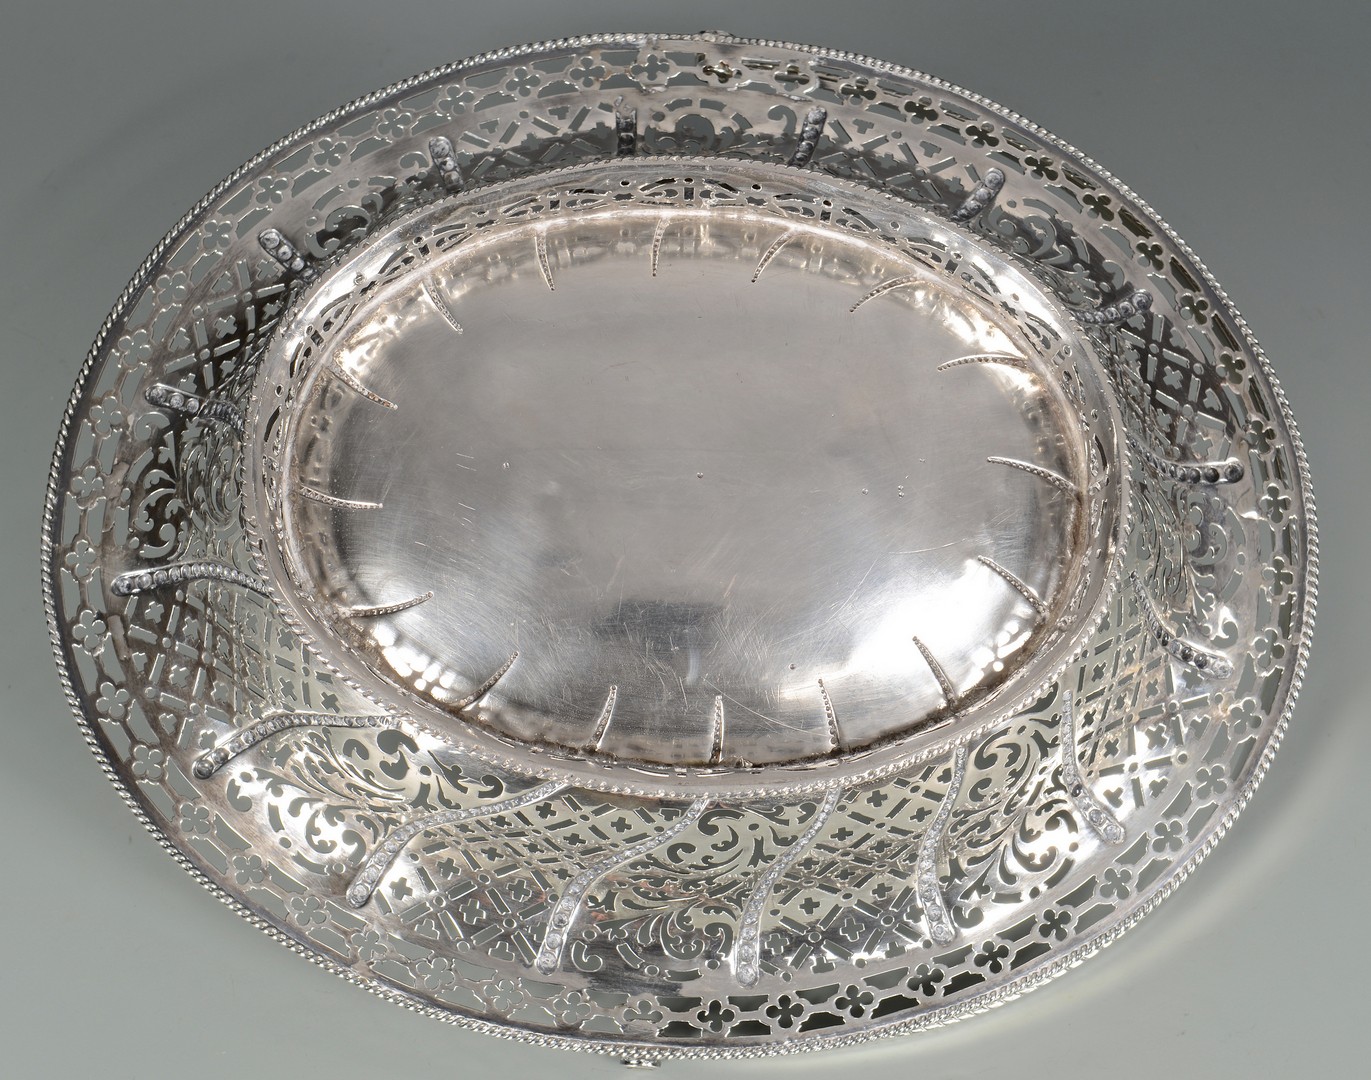 Lot 407: English Silver Basket & French Cup